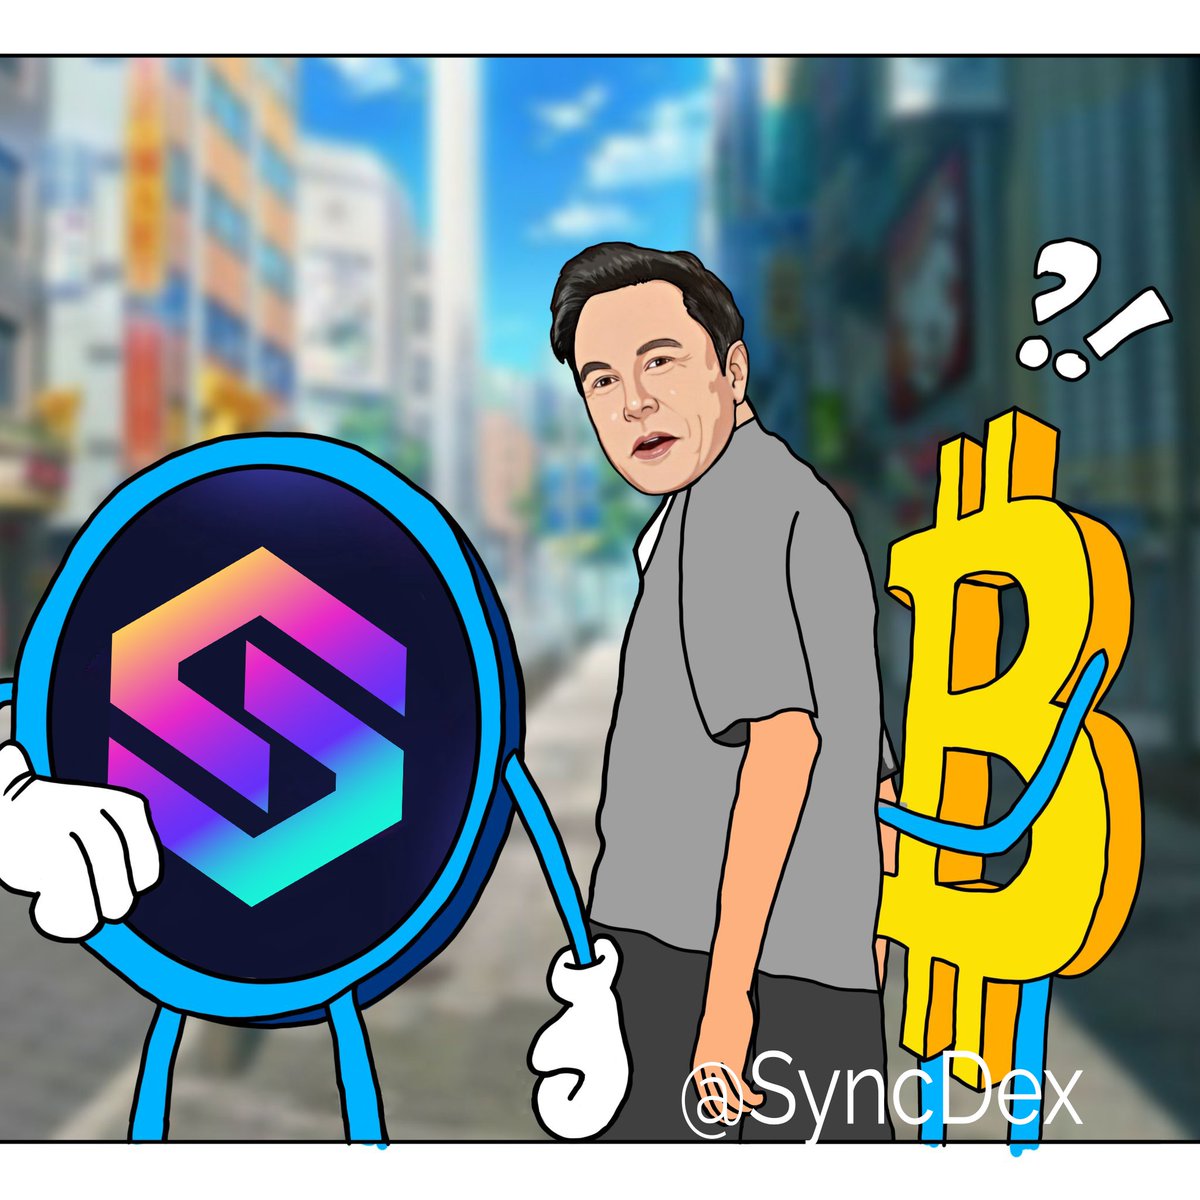 💎WHY YOU SHOULD USE SYNCDEX
Here are a few reasos might want to use Syncdex
- Cross-chain trading: Syncdex is one of the few Dex that offers the ability to trade across multiple blockchains This is a big advantage for users who want to access a wider range of tokens and markets